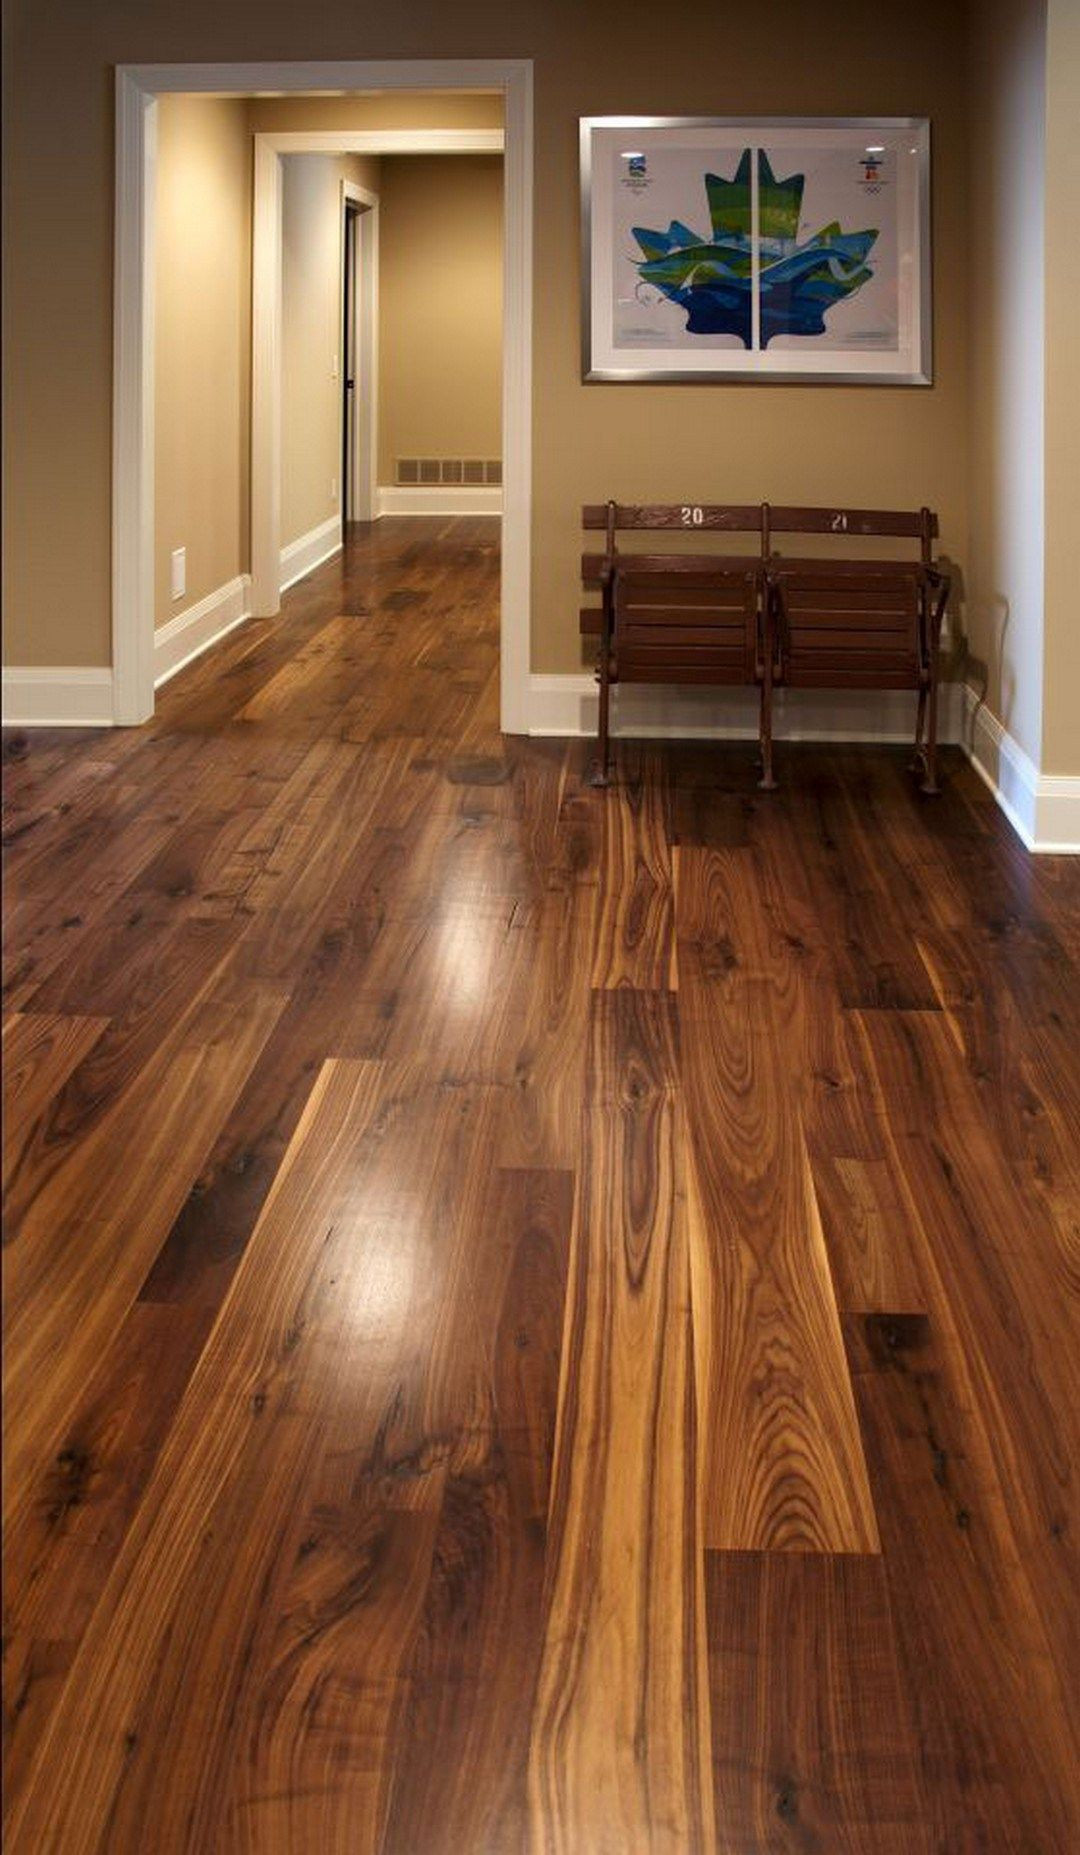 29 Spectacular Project source 5 In Brown Oak Hardwood Flooring 2024 free download project source 5 in brown oak hardwood flooring of 60 perfect color wood flooring ideas pinterest flooring ideas regarding perfect color wood flooring ideas 3